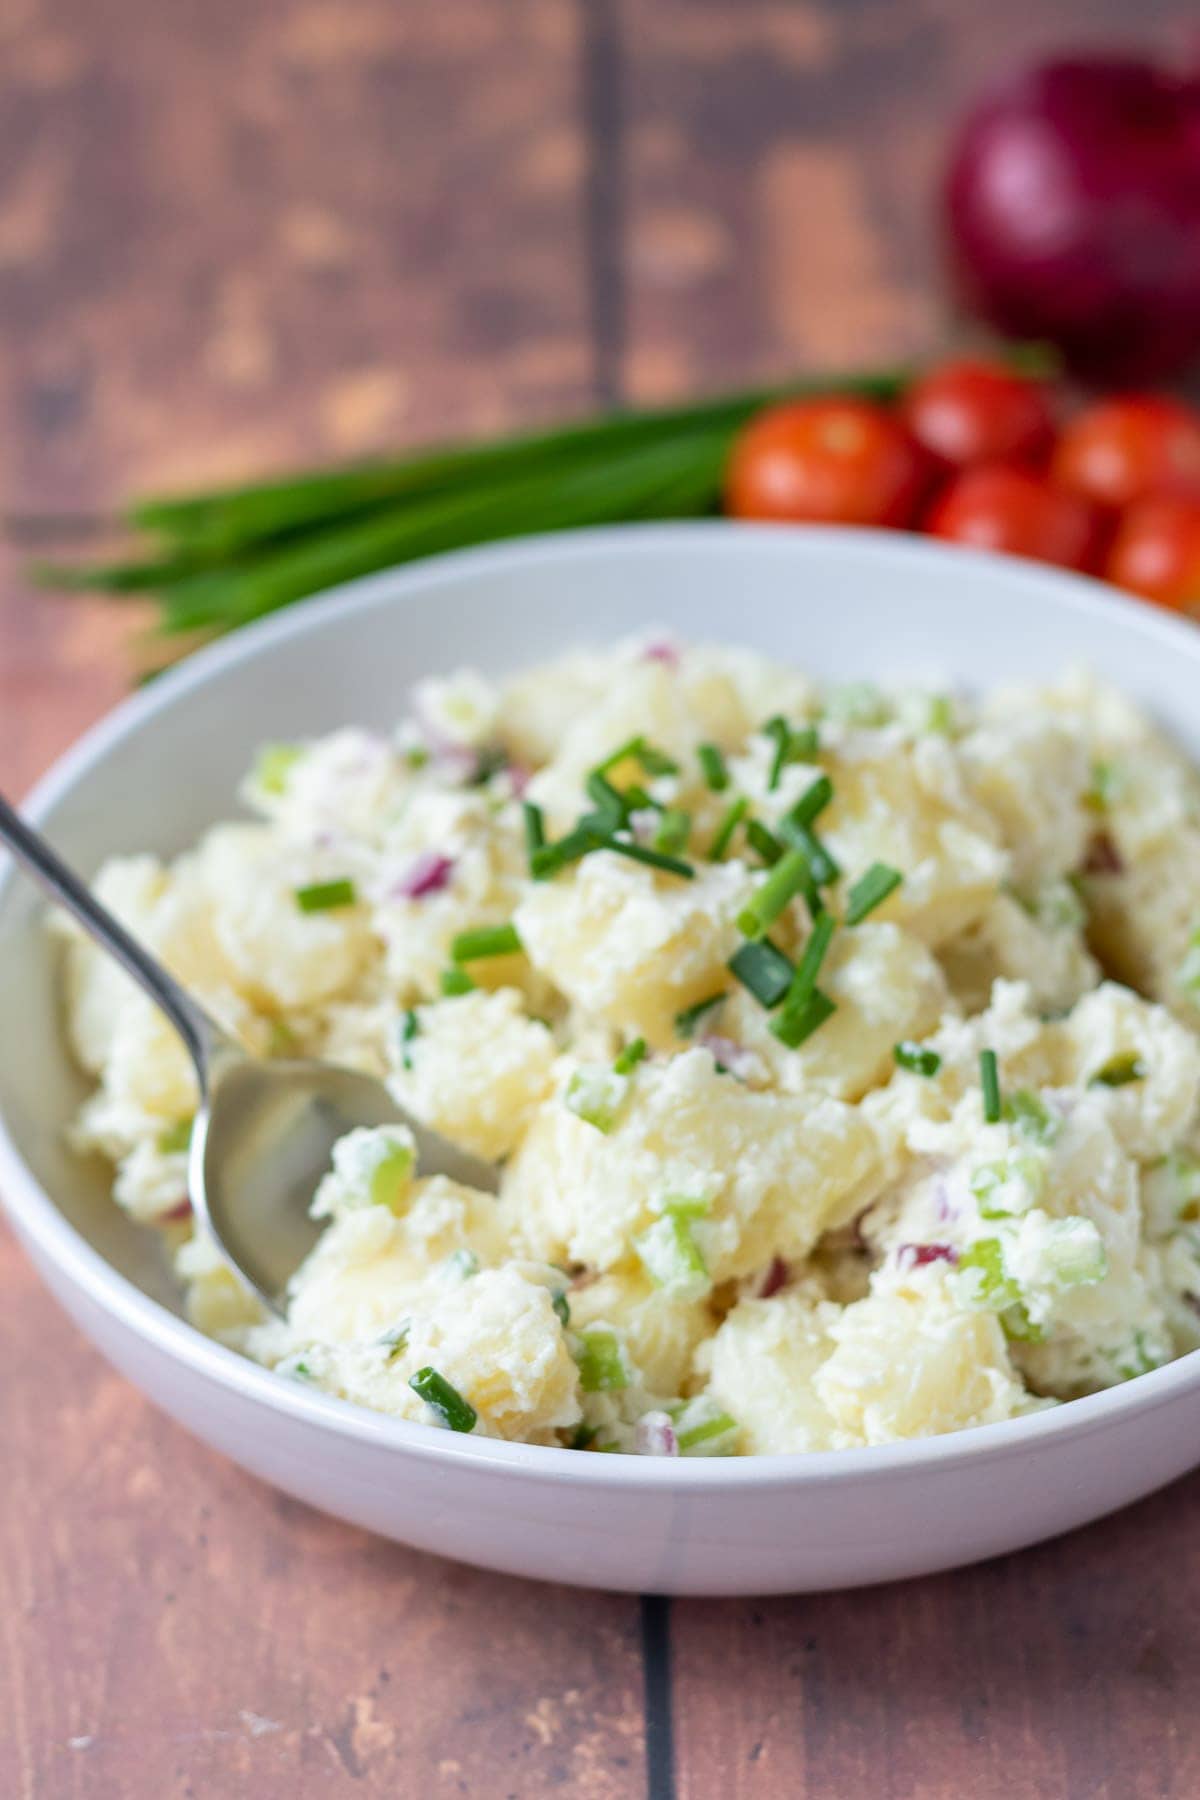 Potato salad in a bowl with a serving spoon to the side. Chives, cherry tomatoes and a red onion in the background as decoration.